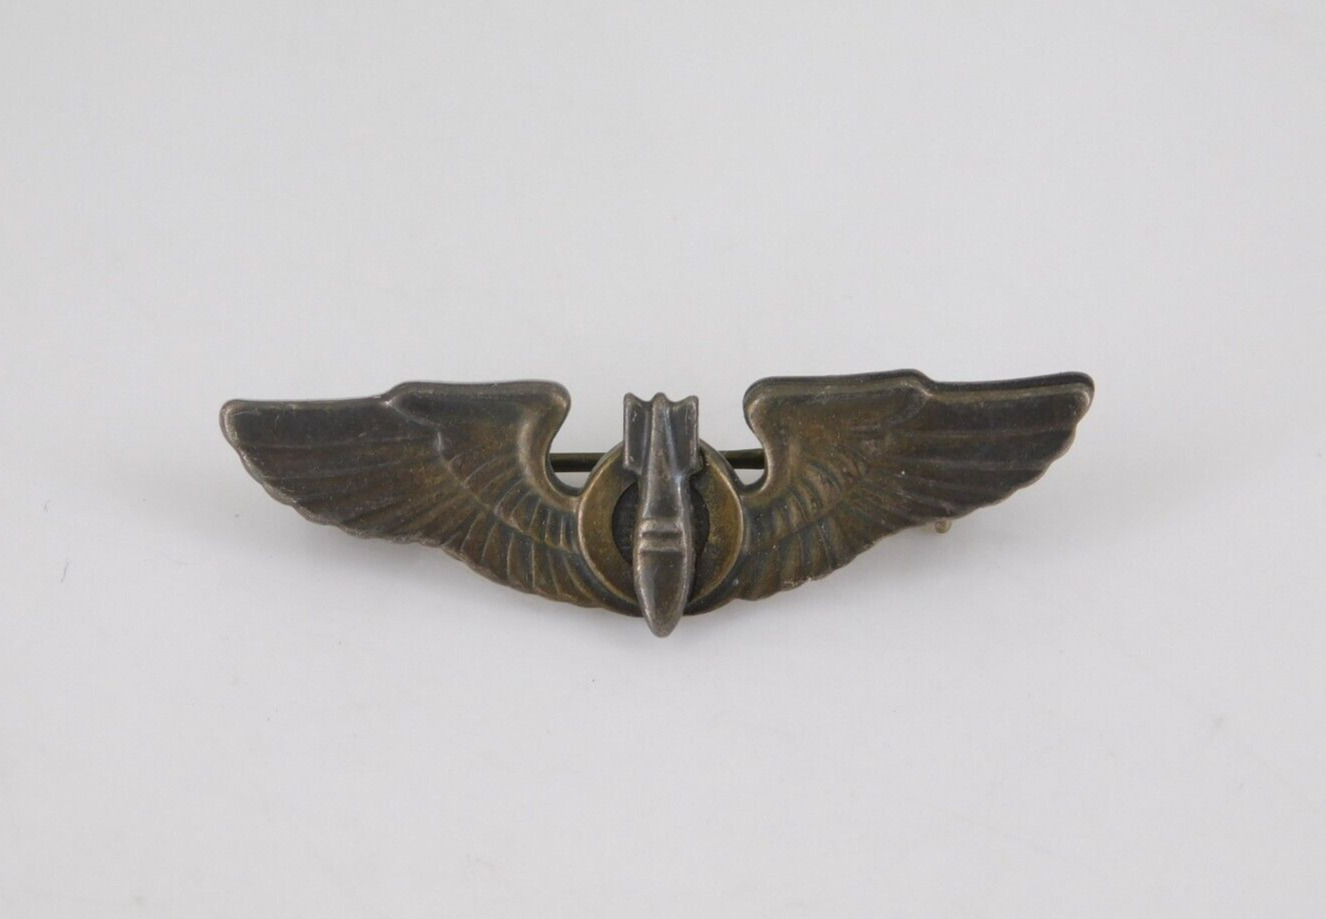 WWII Army Air Corps Bomber Bombardier Wings Coin Silver Badge Pin 1  3/8